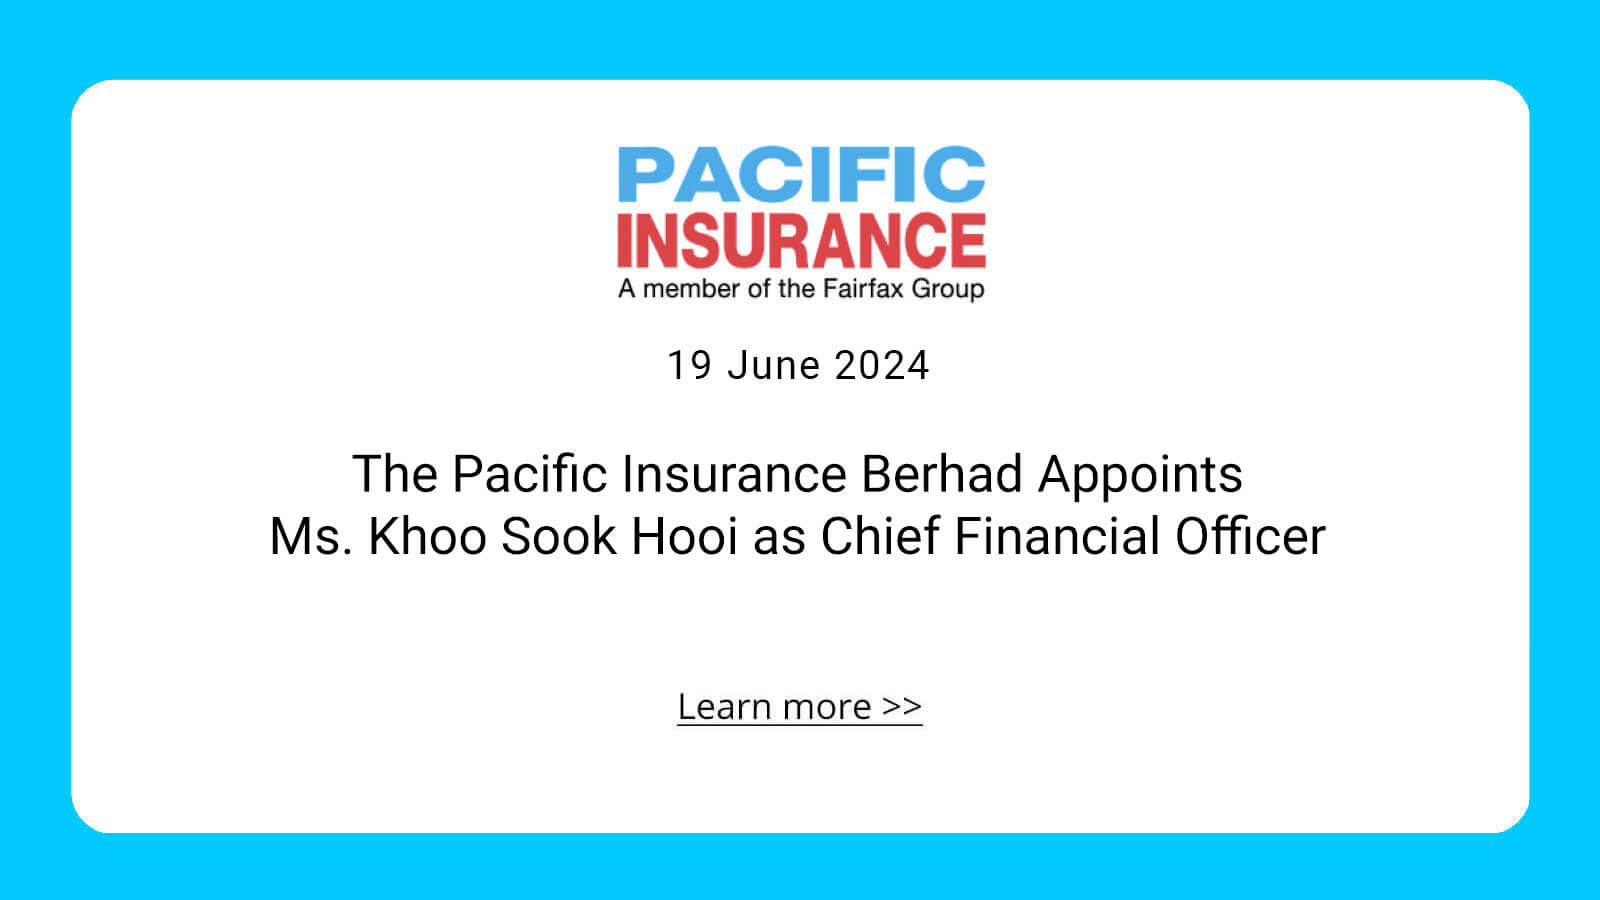 The Pacific Insurance Berhad Appoints Ms. Khoo Sook Hooi as Chief Financial Officer